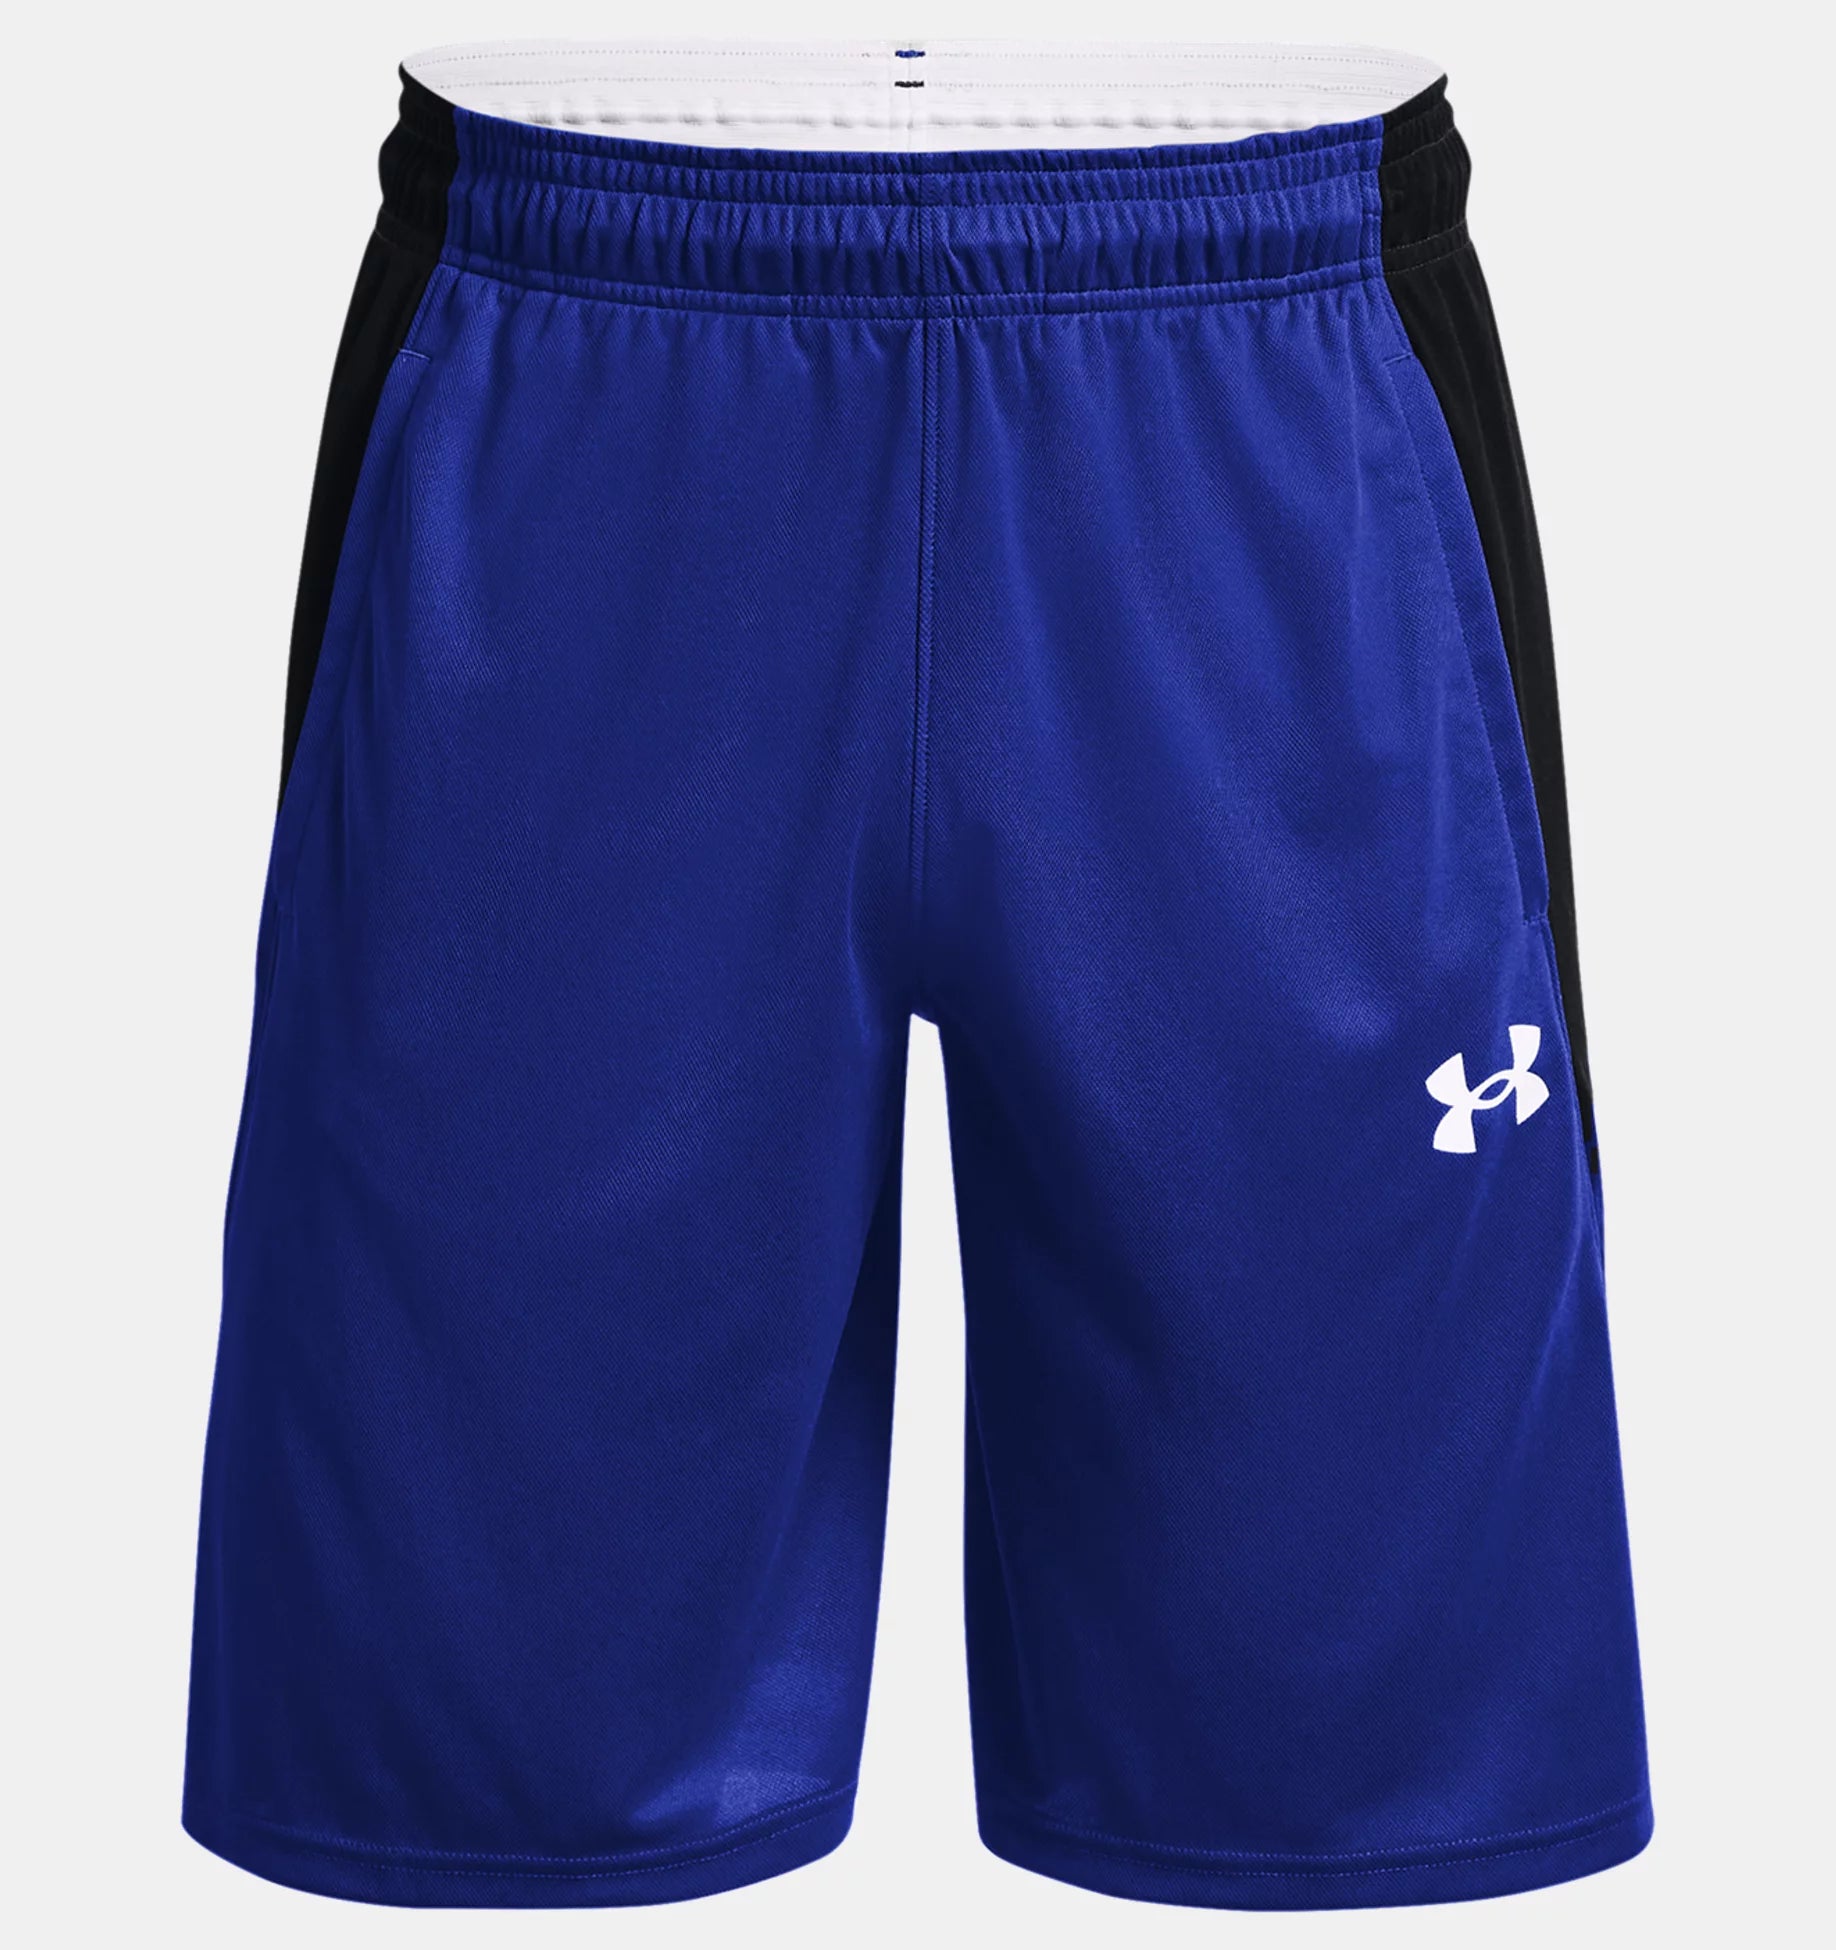 UAA-D11 (Under armour mens baseline 10 inch shorts royal/white) 112393043